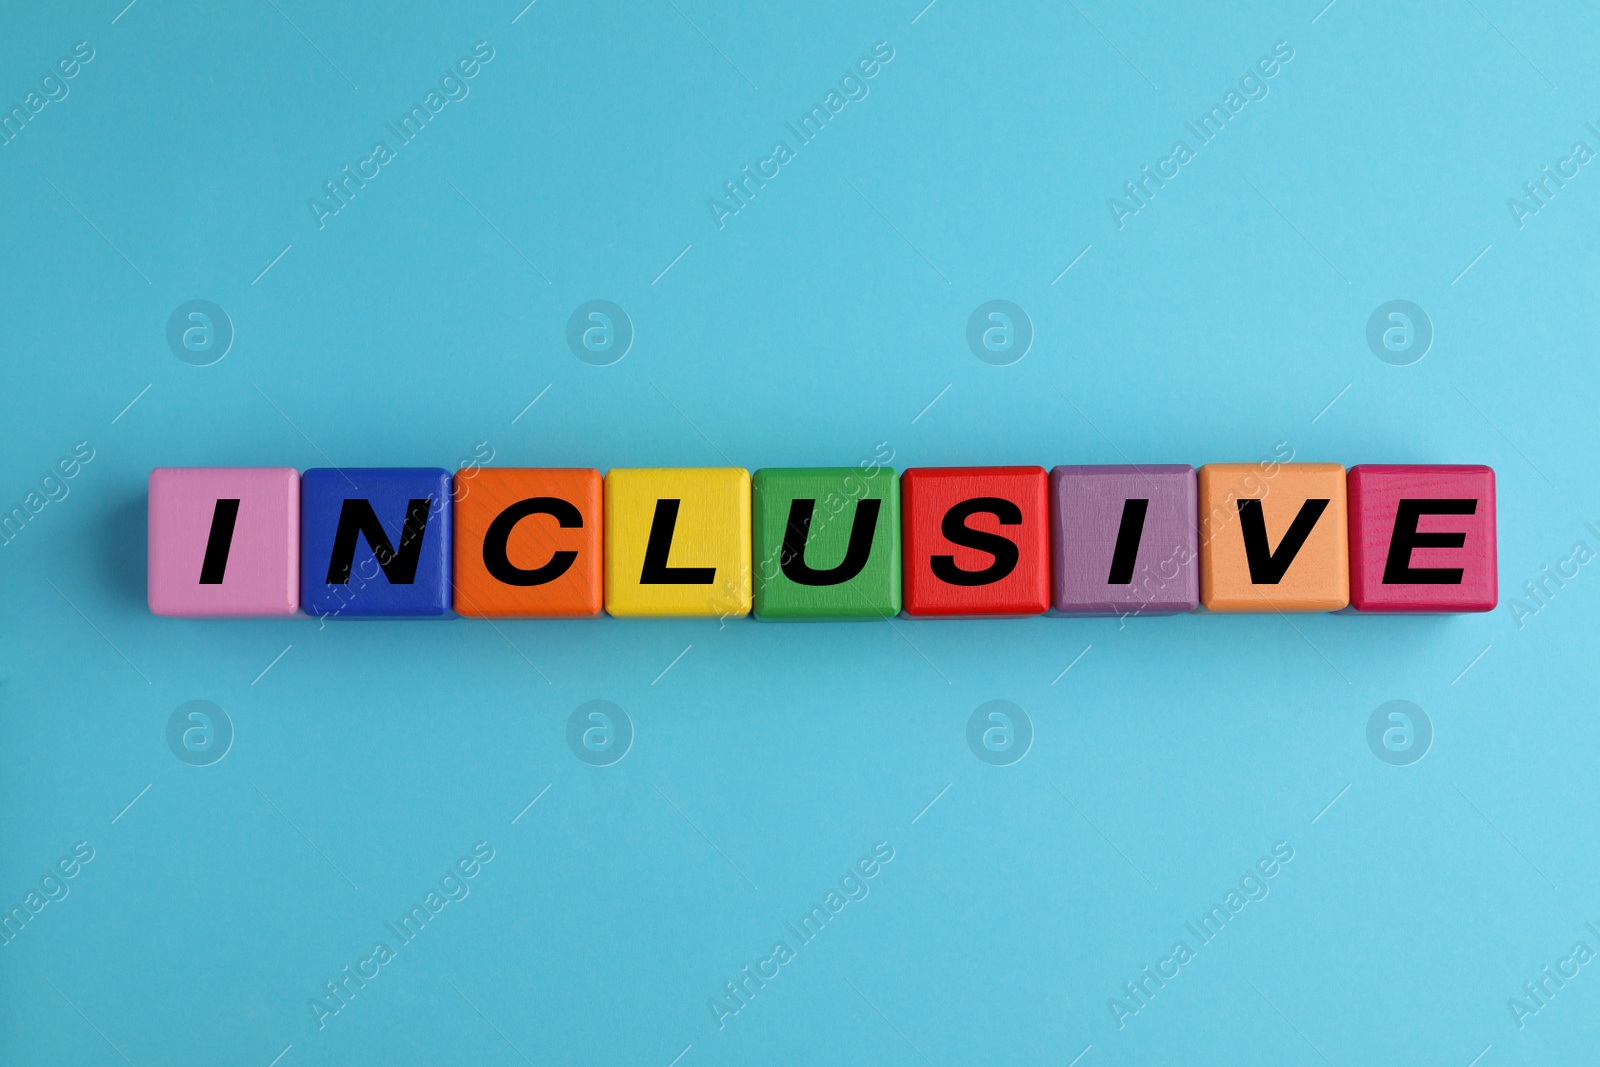 Photo of Colorful cubes with word Inclusive on light blue background, flat lay